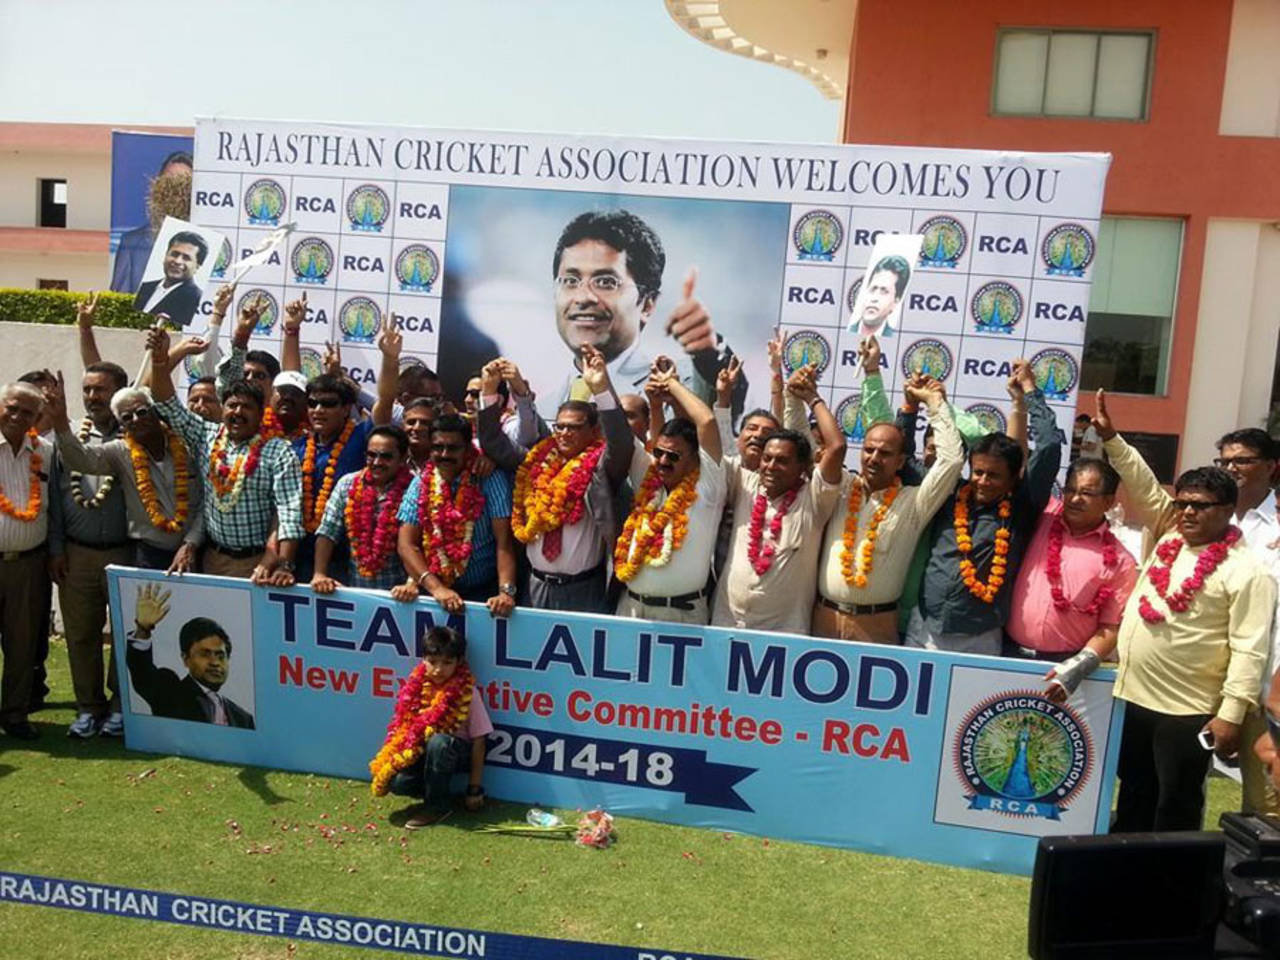 Lalit Modi's supporters celebrate after he is named Rajasthan Cricket Association president in Jaipur on May 6, 2014